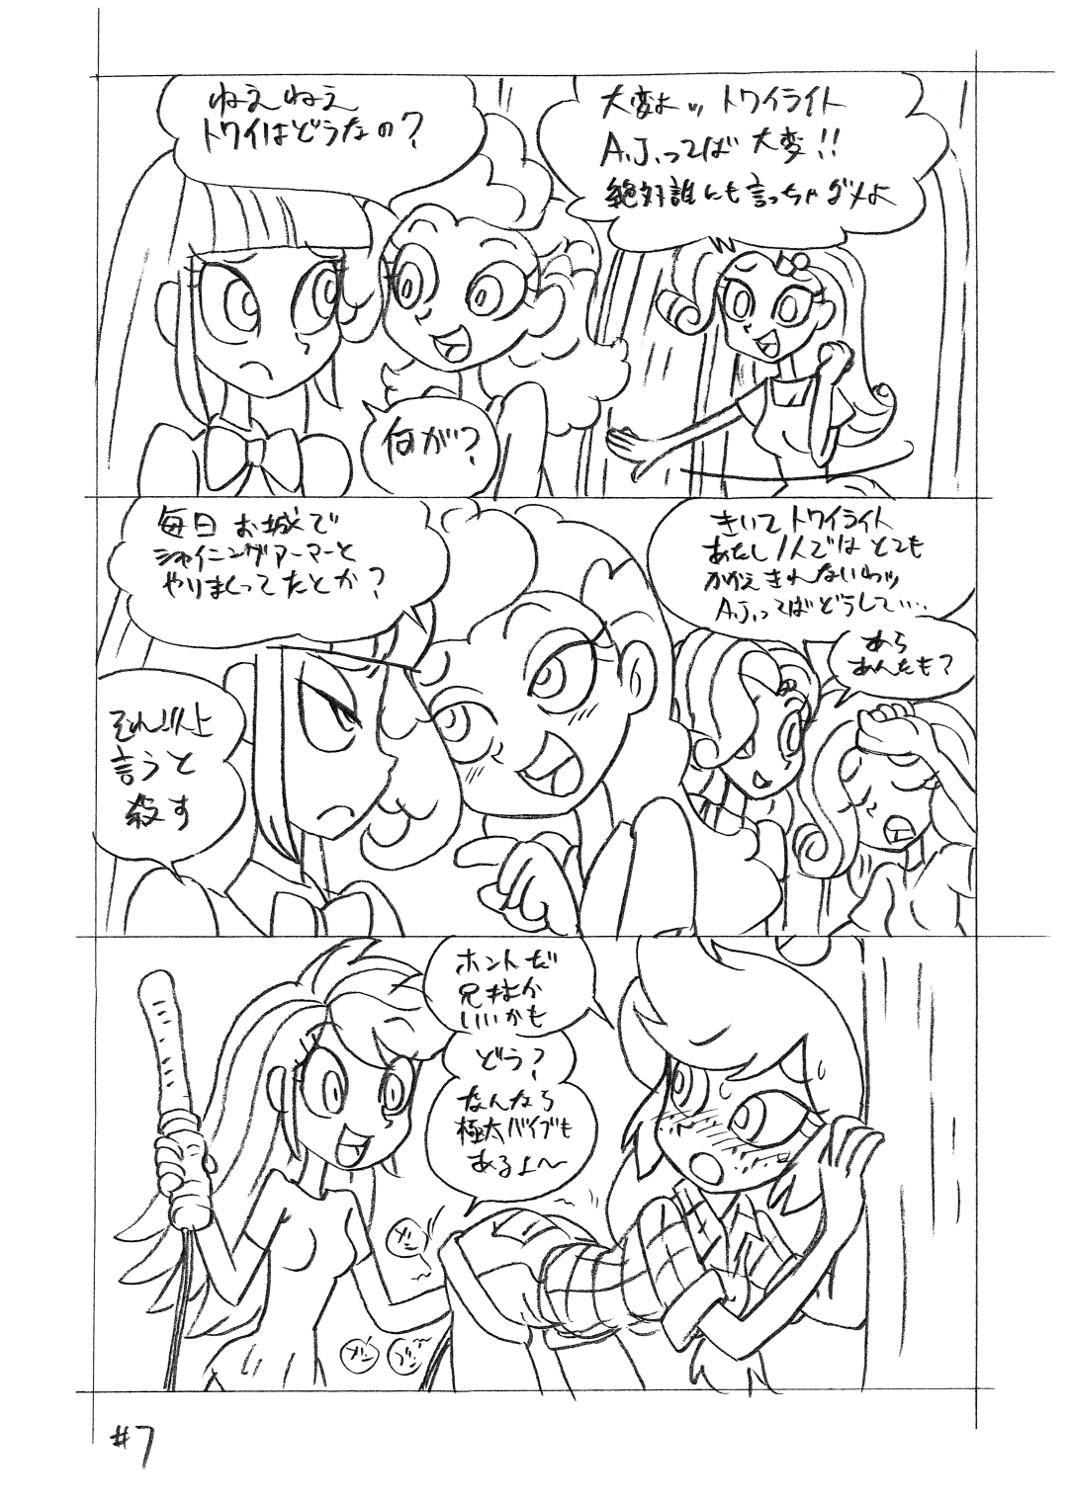 Culo Grande Psychosomatic Counterfeit EX- A.J. in E.G. Style - My little pony friendship is magic Porno - Page 6